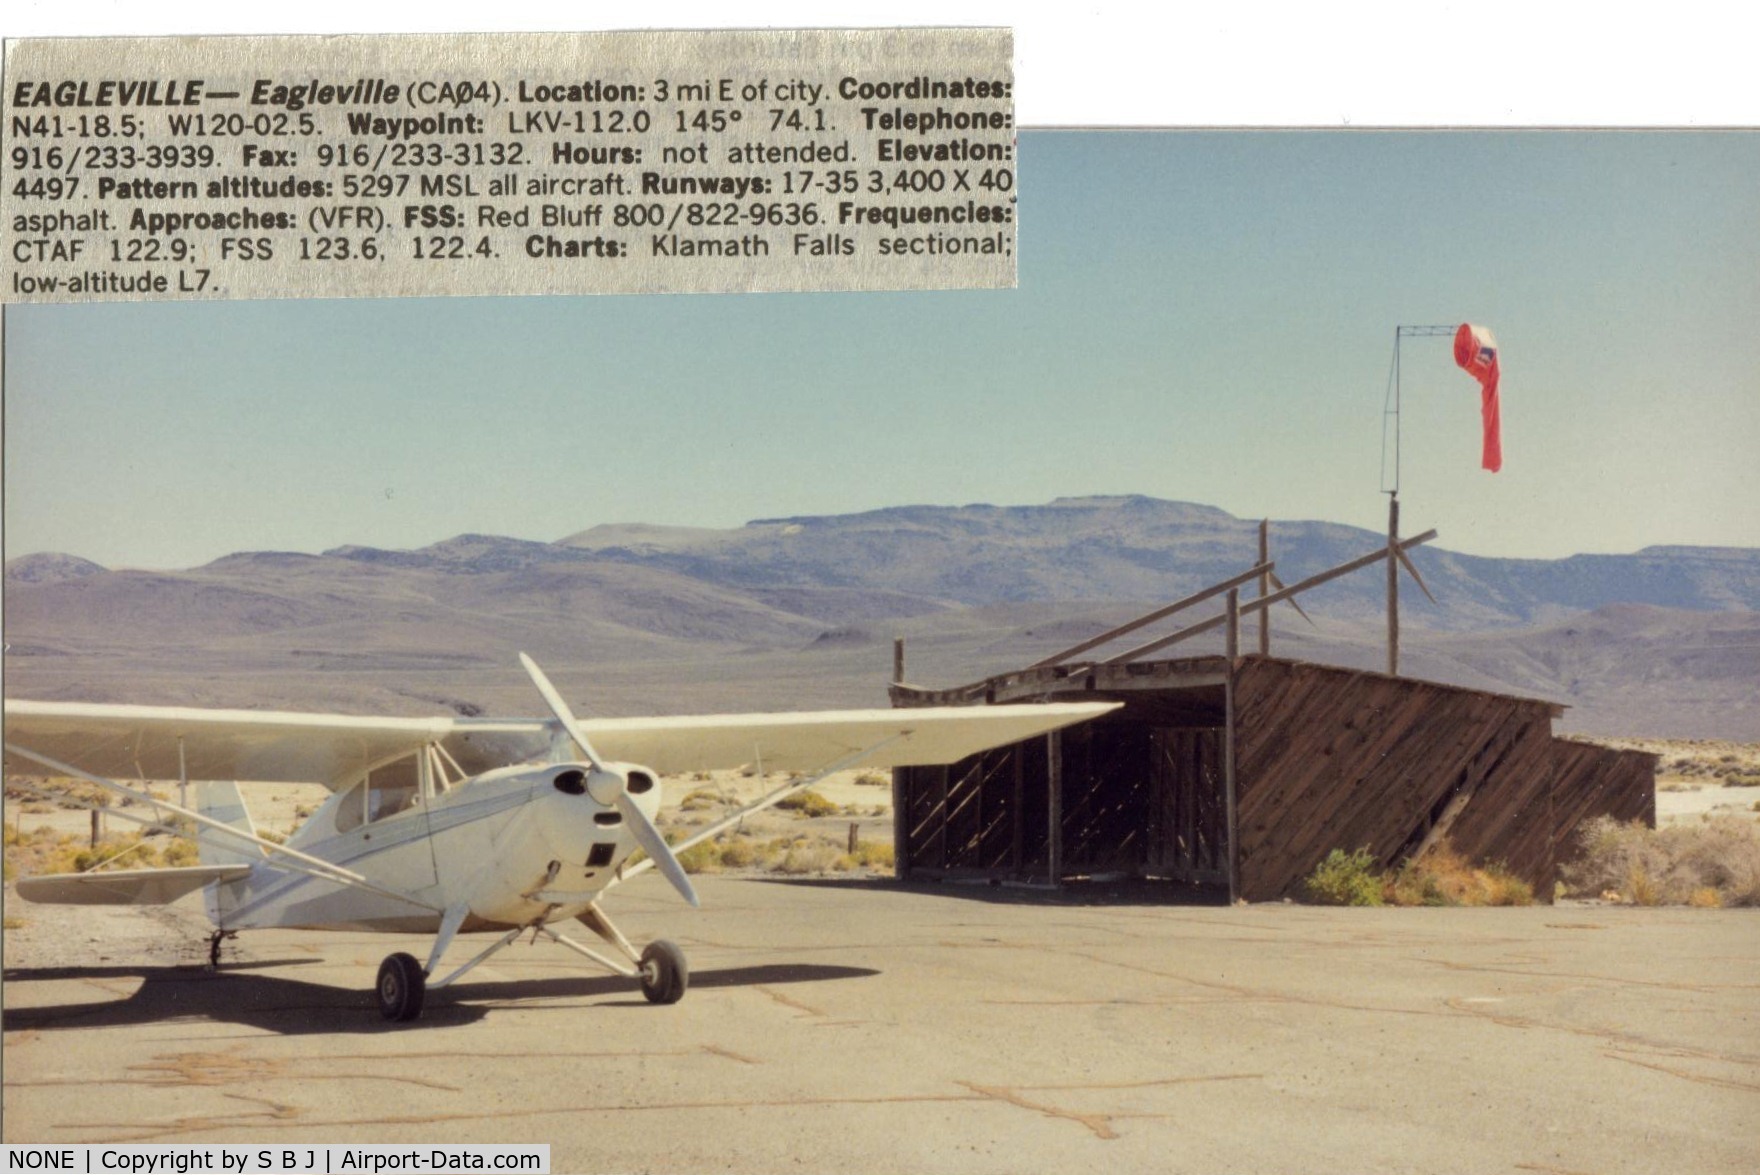 NONE Airport - Eagleville airport which was closed around 2000 was a nice little airport in NE calif.While it was in Ca,the mountains seen are in Nevada.This stop was in 1988. This nice hangar was the only structure at the airport.